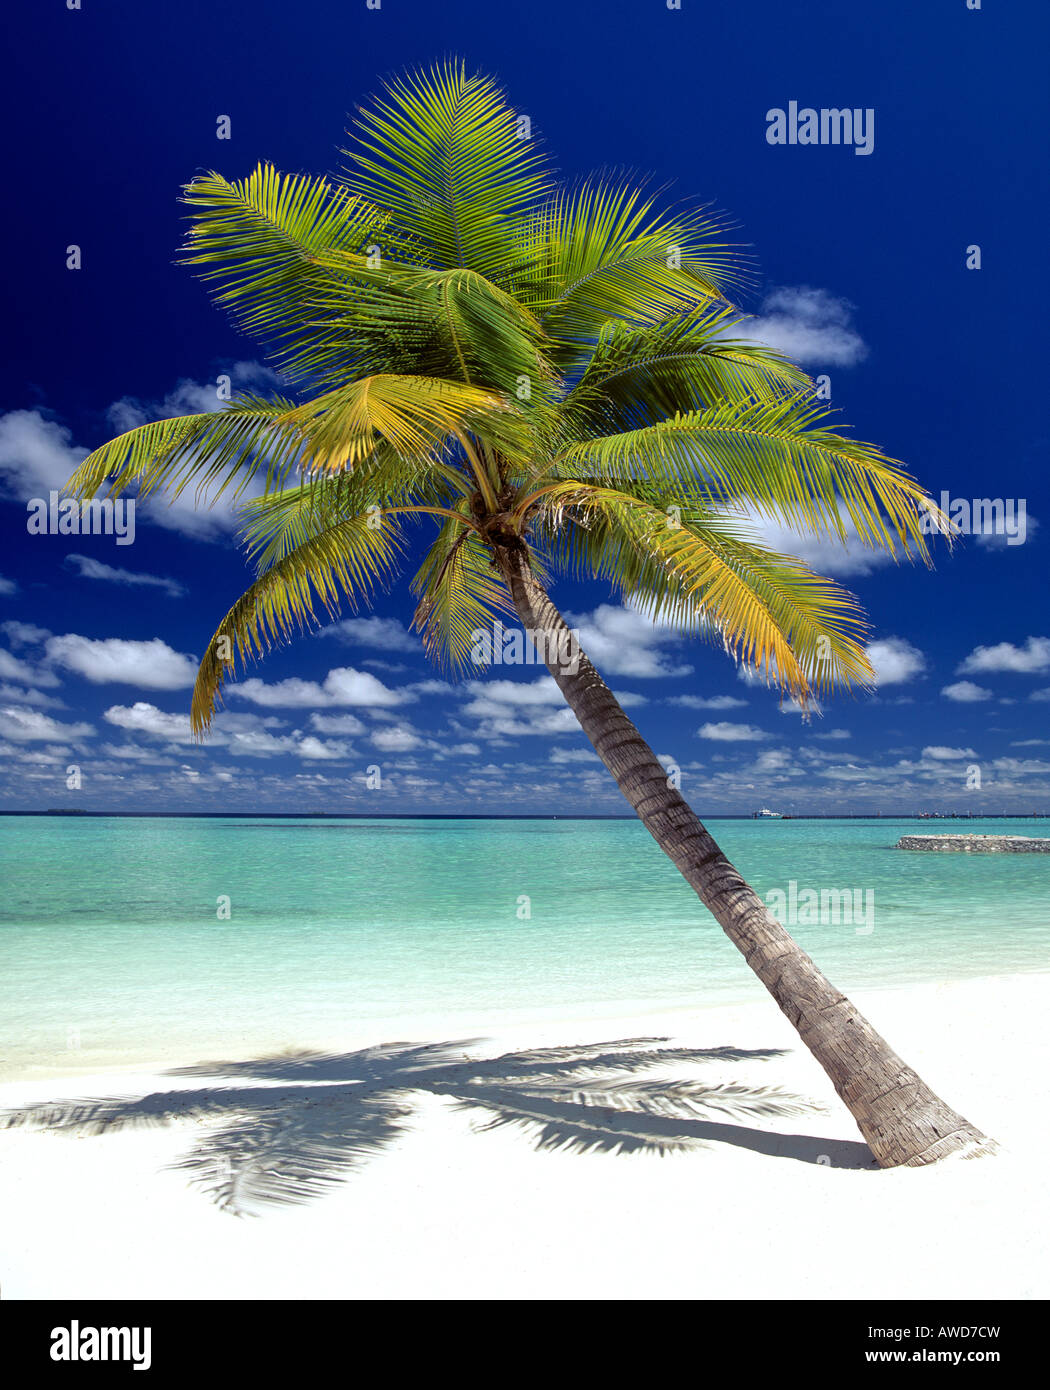 Palm tree, beach and clouds, Maldives, Indian Ocean Stock Photo